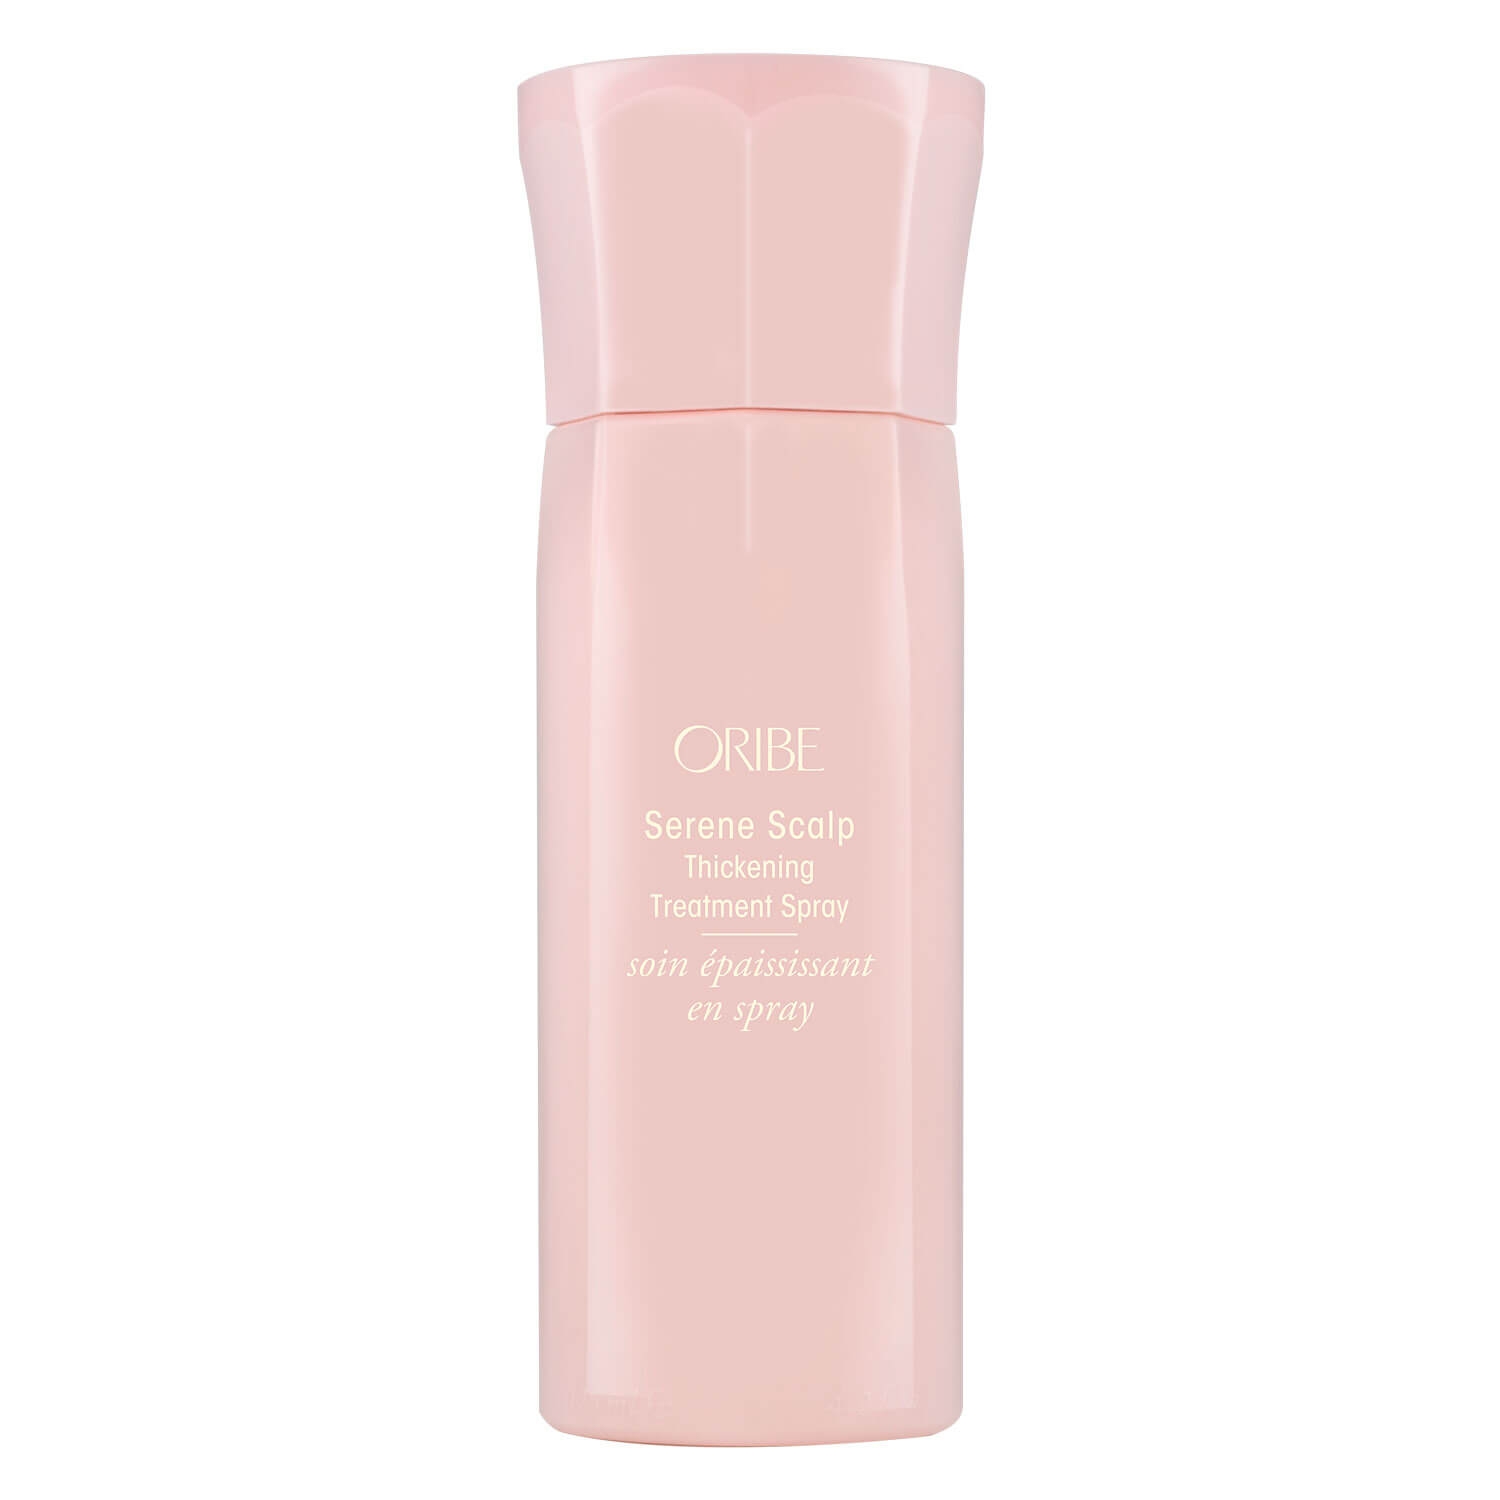 Product image from Oribe Care - Serene Scalp Thickening Treatment Spray